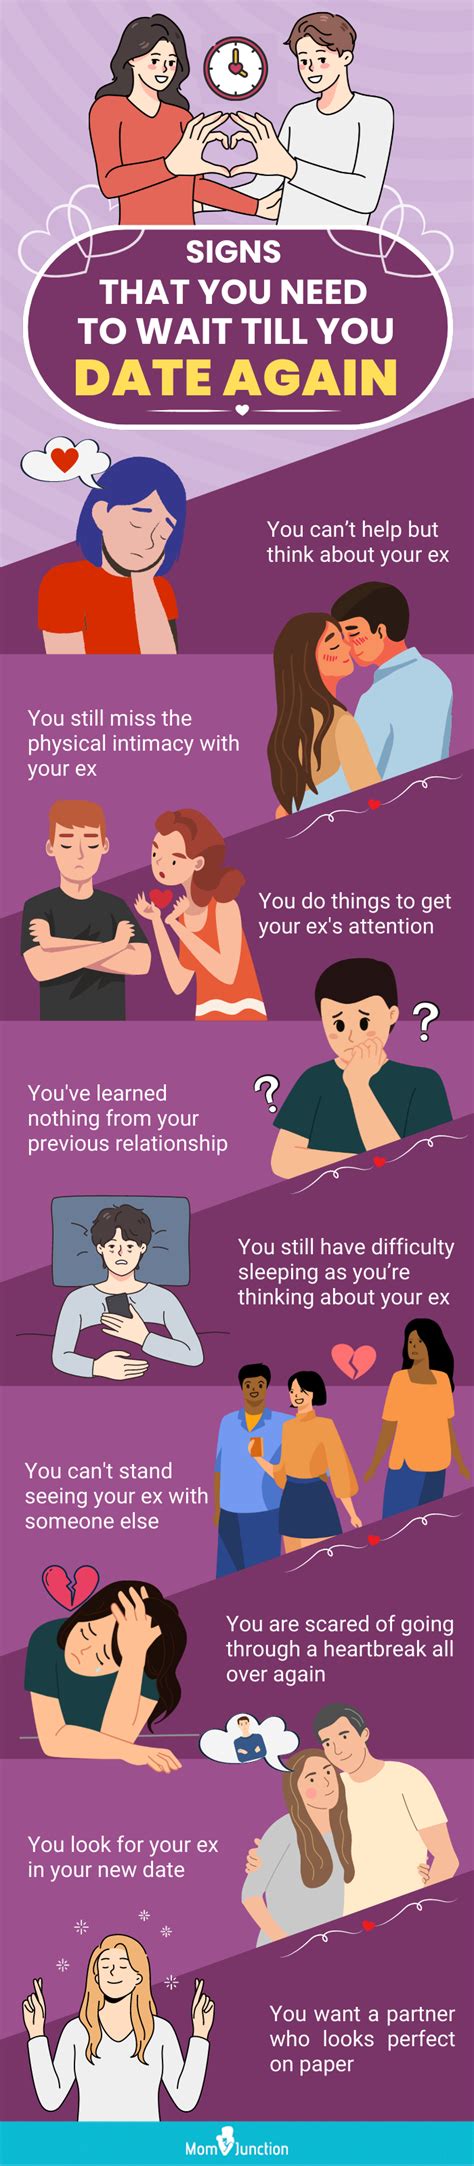 Dating After A Breakup: How to Know If You're Ready